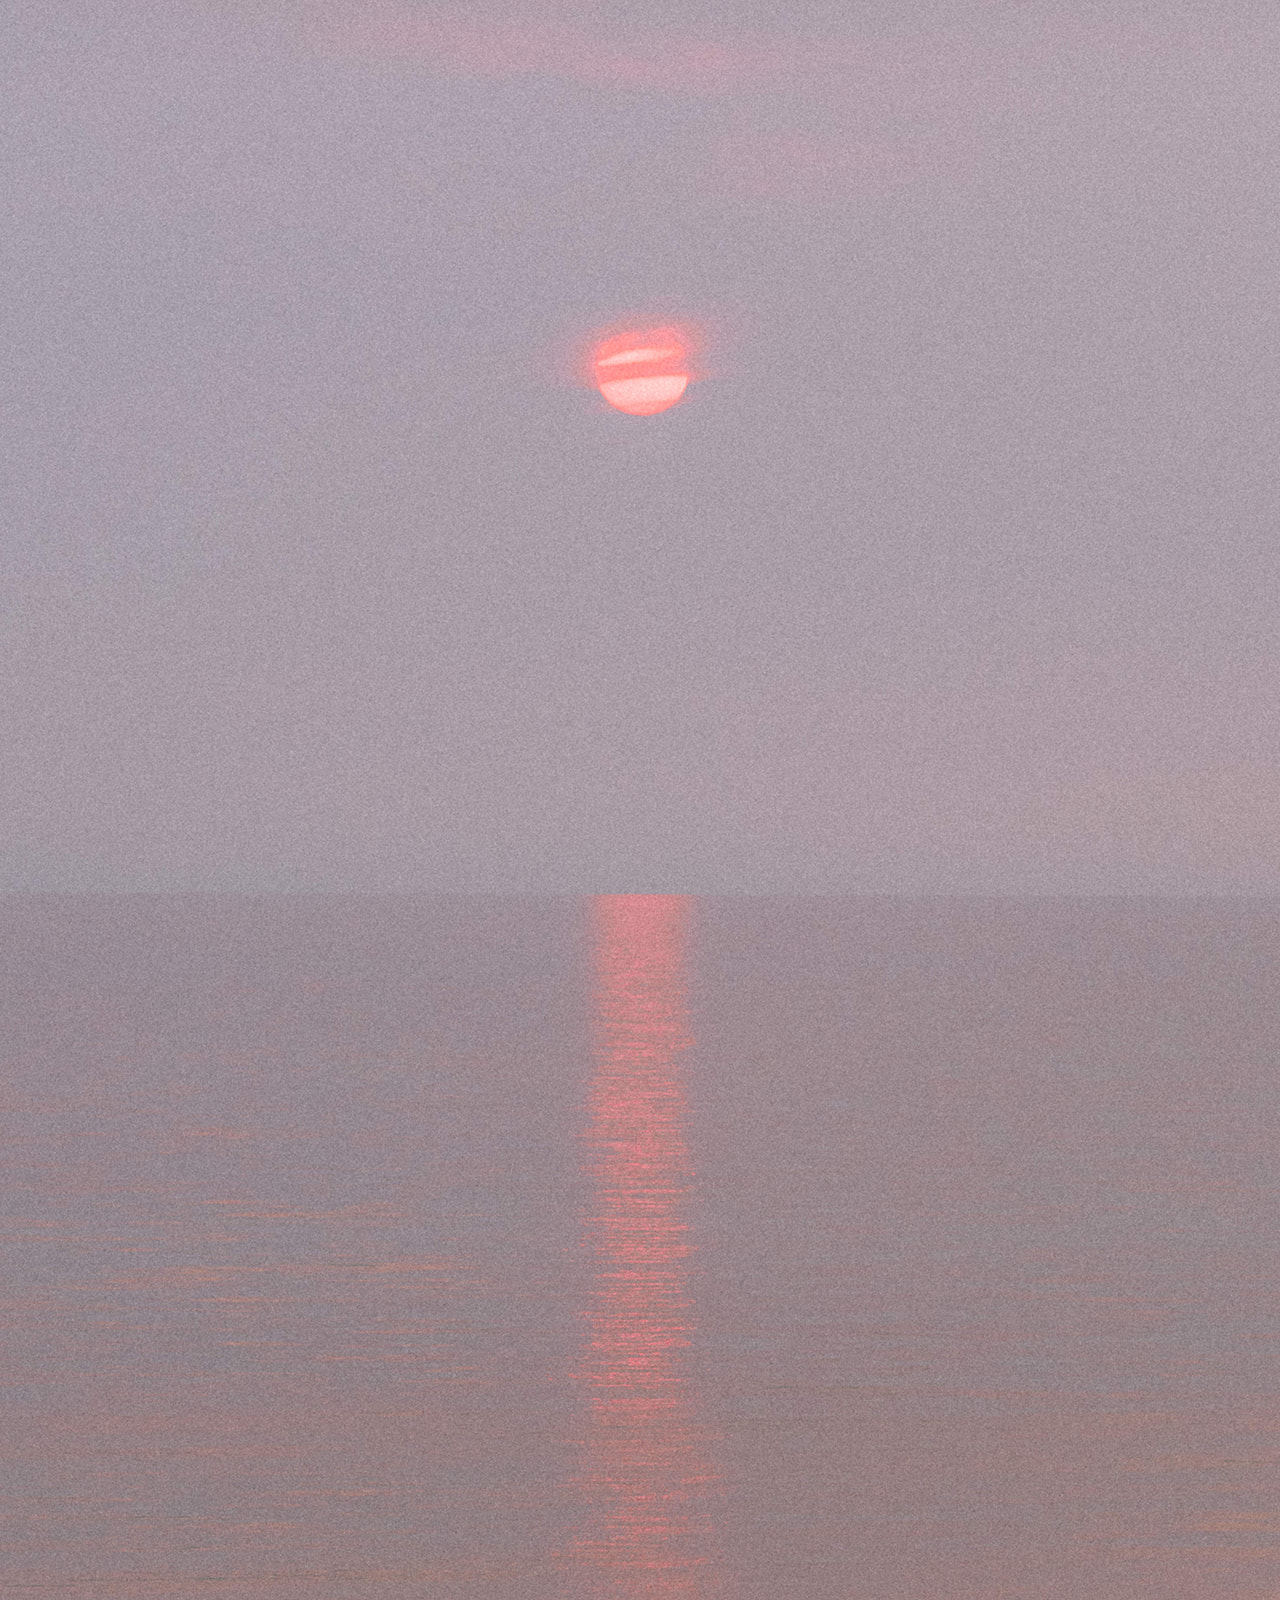 A hazy red and orange sunset reflecting off the still and calm waters of Lake Michigan